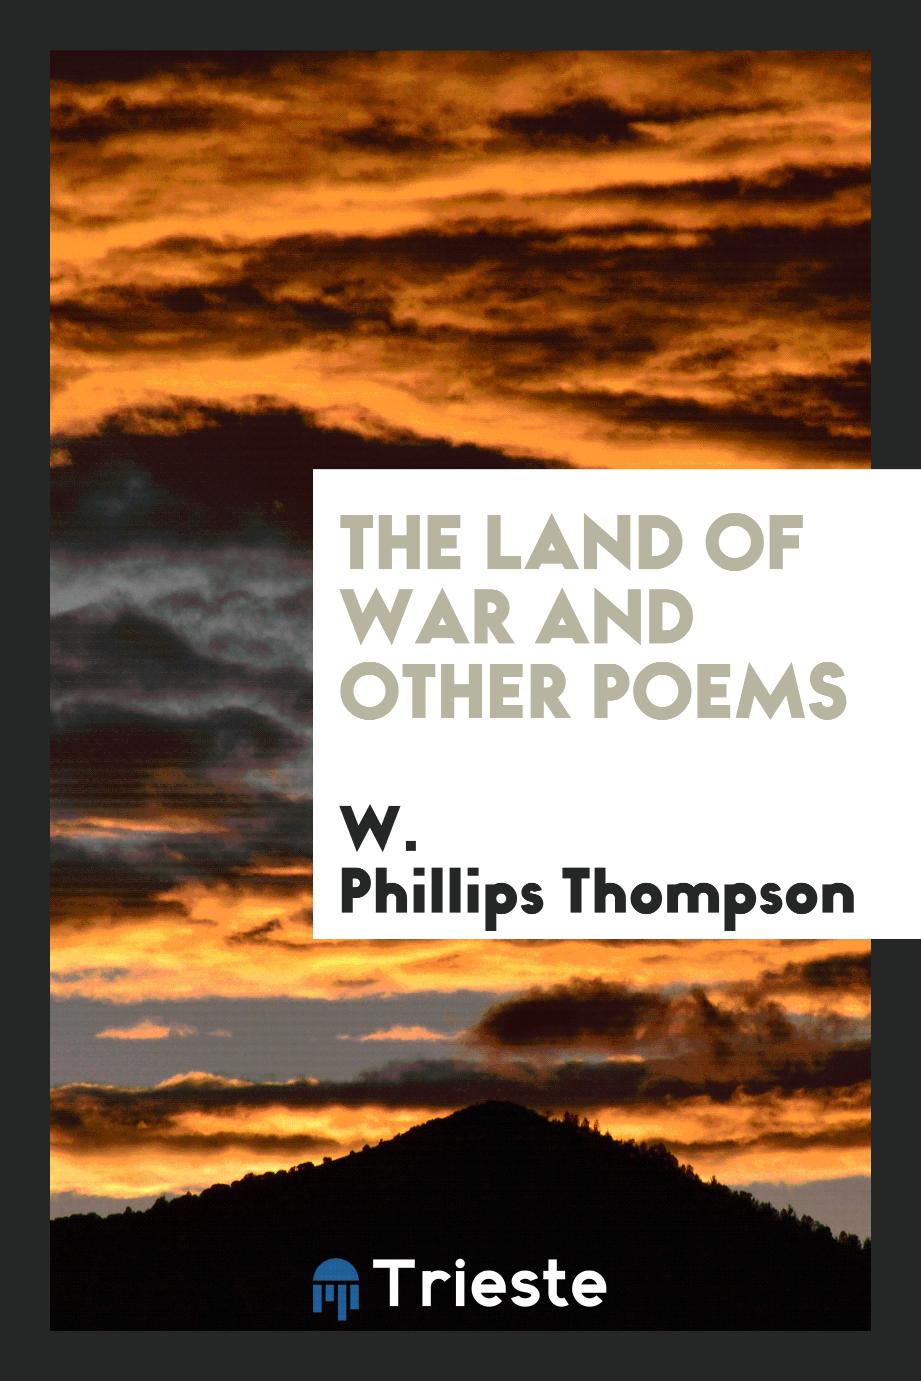 The Land of War and Other Poems